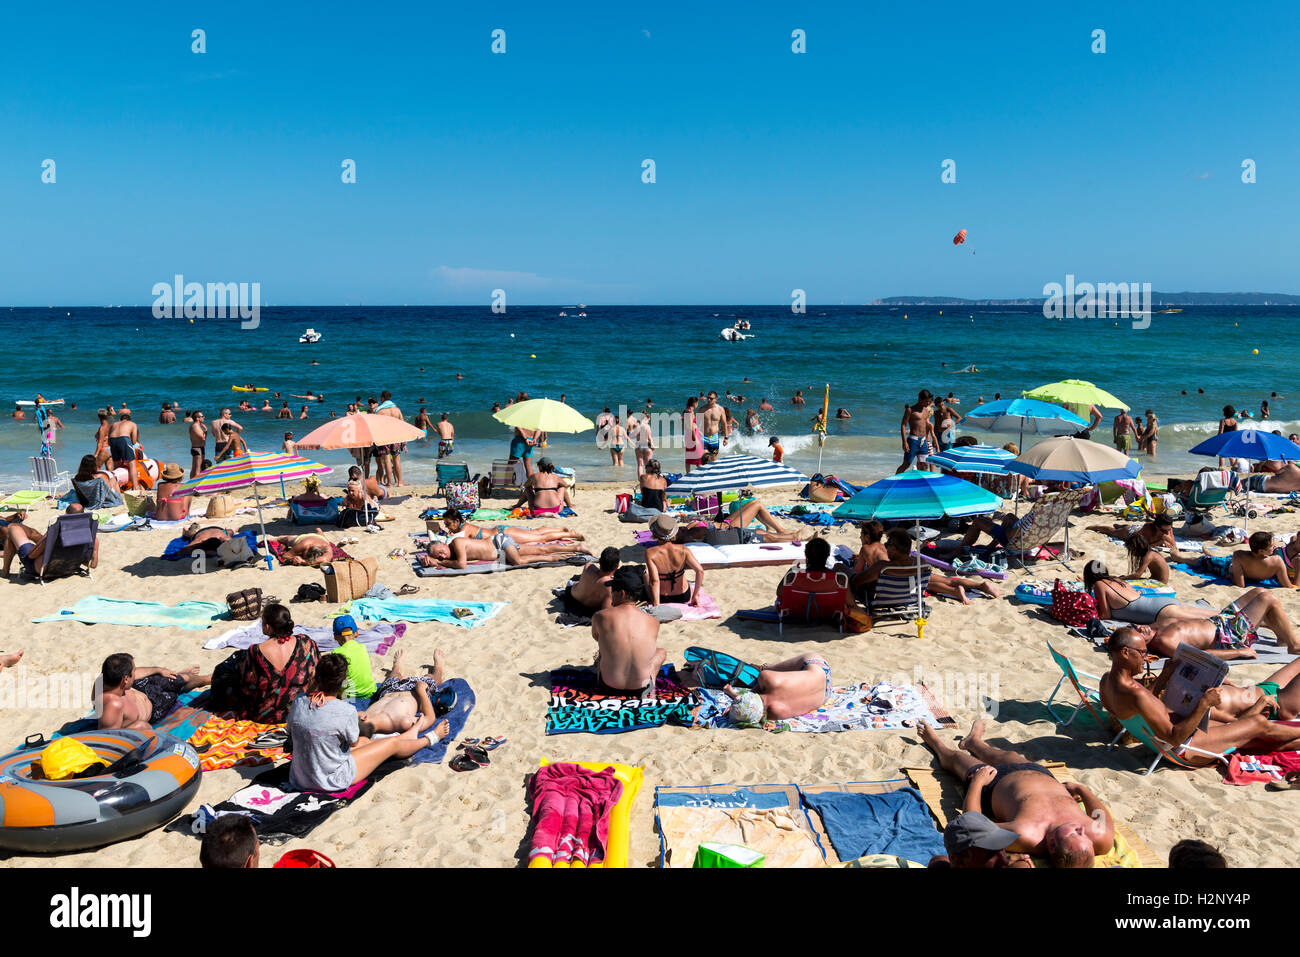 Beach packed with holidaymakers, Le Lavandou area, Provence-Alpes-Côte d'Azur region, France Stock Photo